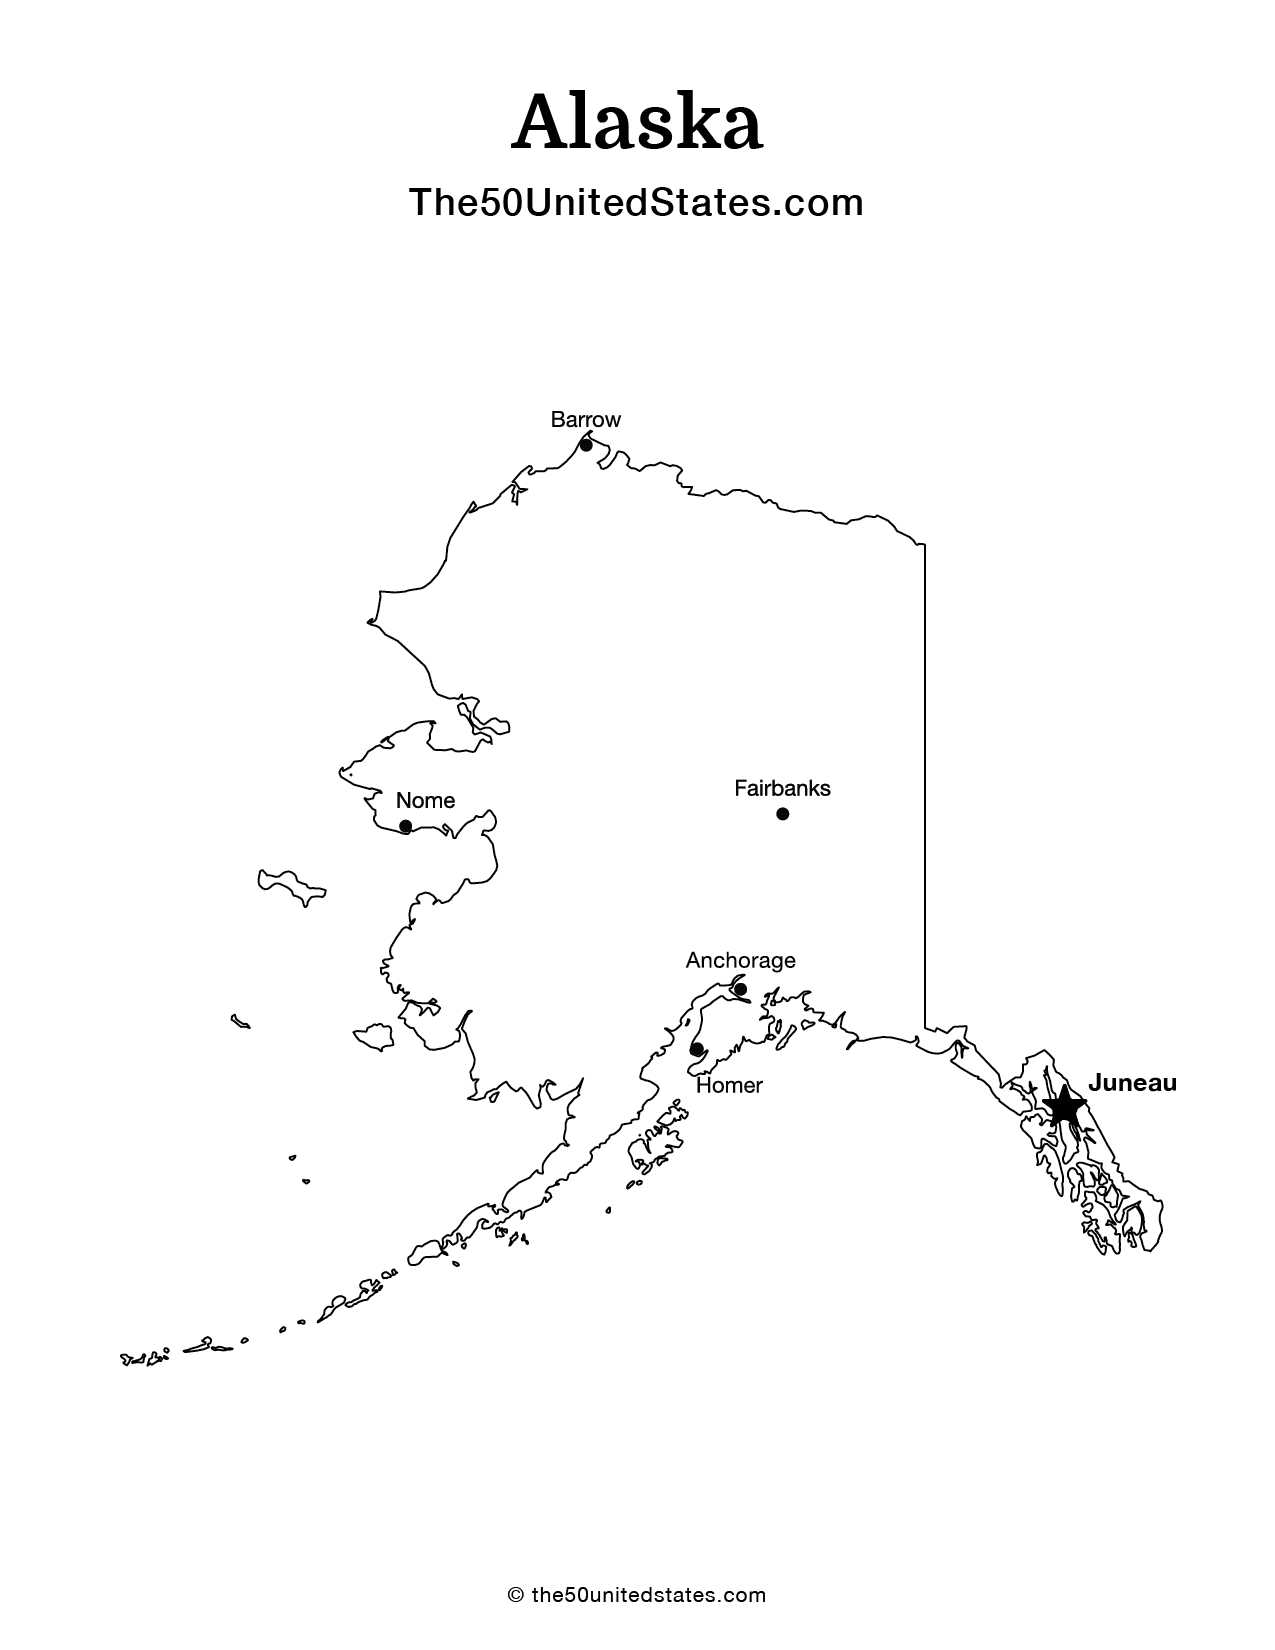 Map of Alaska with Cities (Labeled)